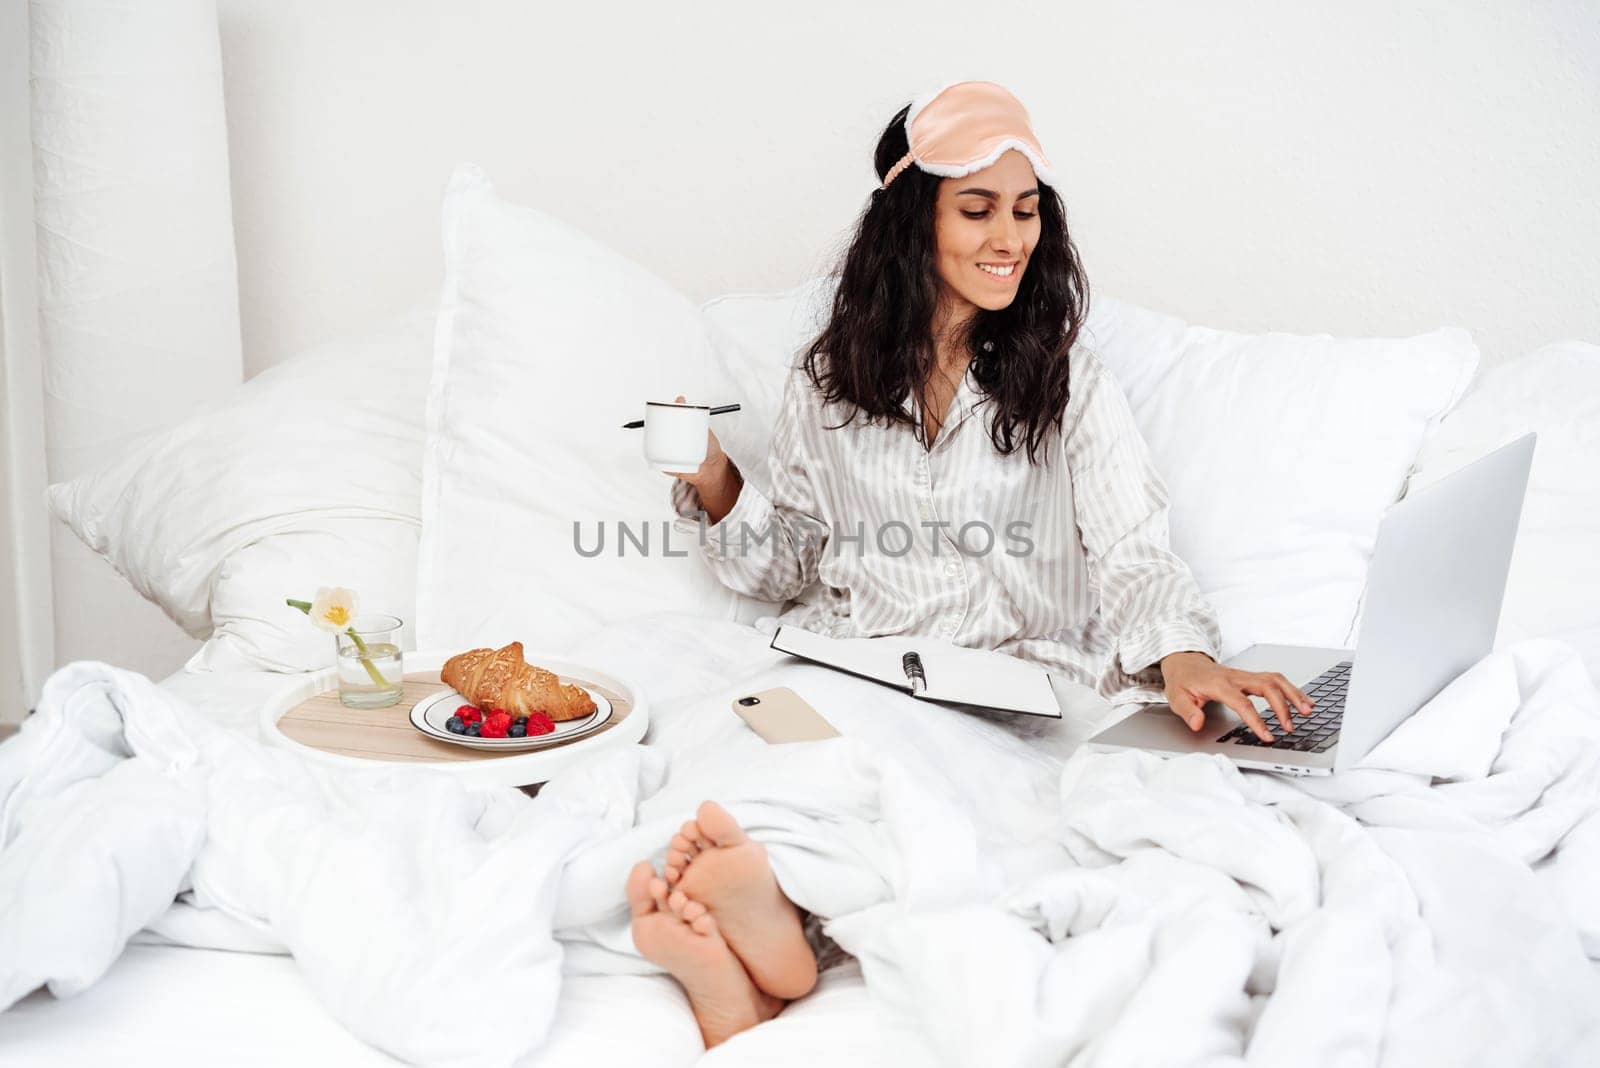 The concept of starting the working day in a homely atmosphere by SistersStock